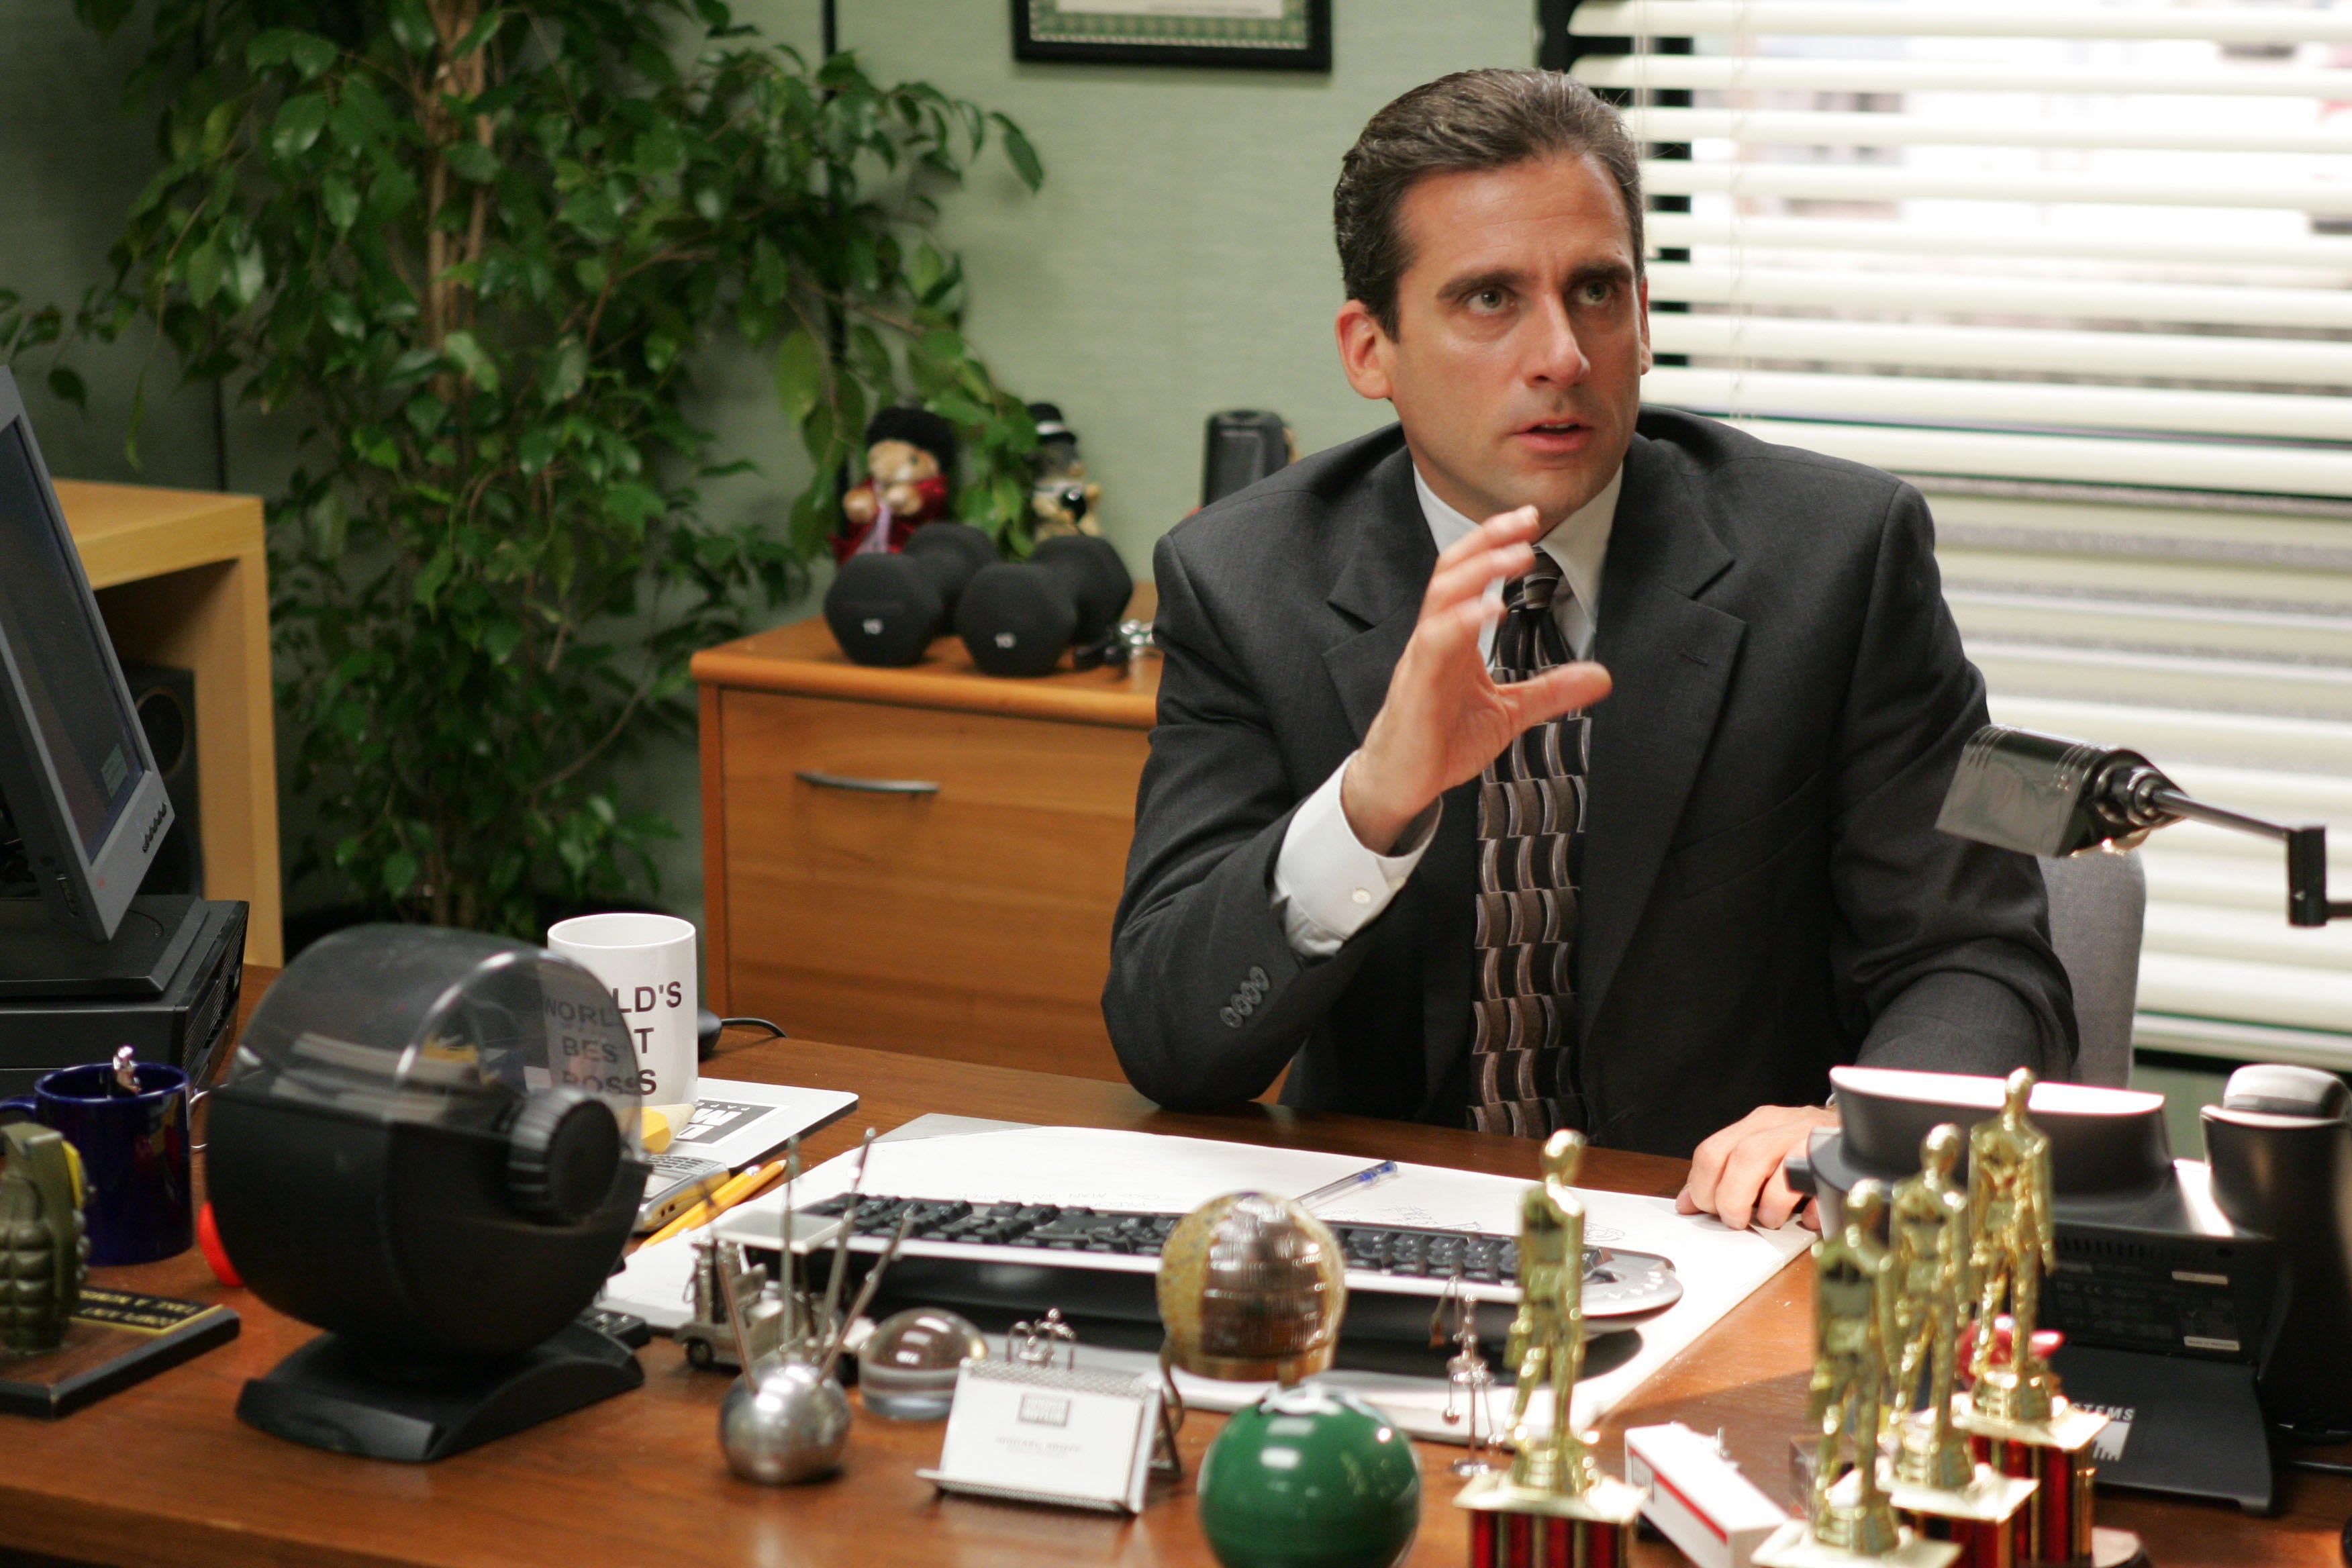 Is the office small